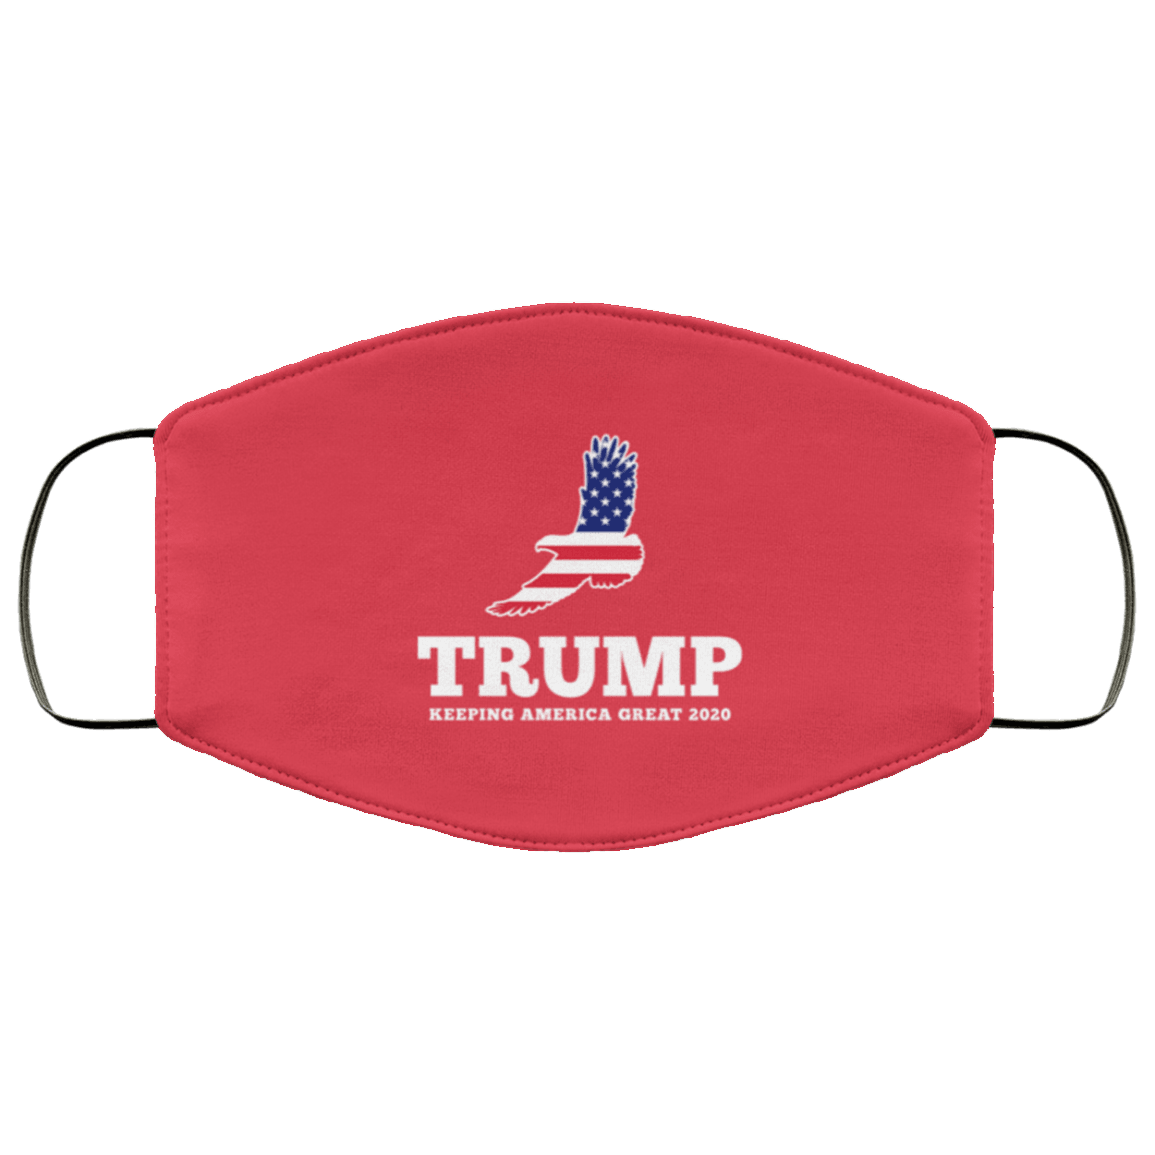 Designs by MyUtopia Shout Out:Eagle Trump 2020 Adult Fabric Face Mask with Elastic Ear Loops,3 Layer Fabric Face Mask / Red / Adult,Fabric Face Mask